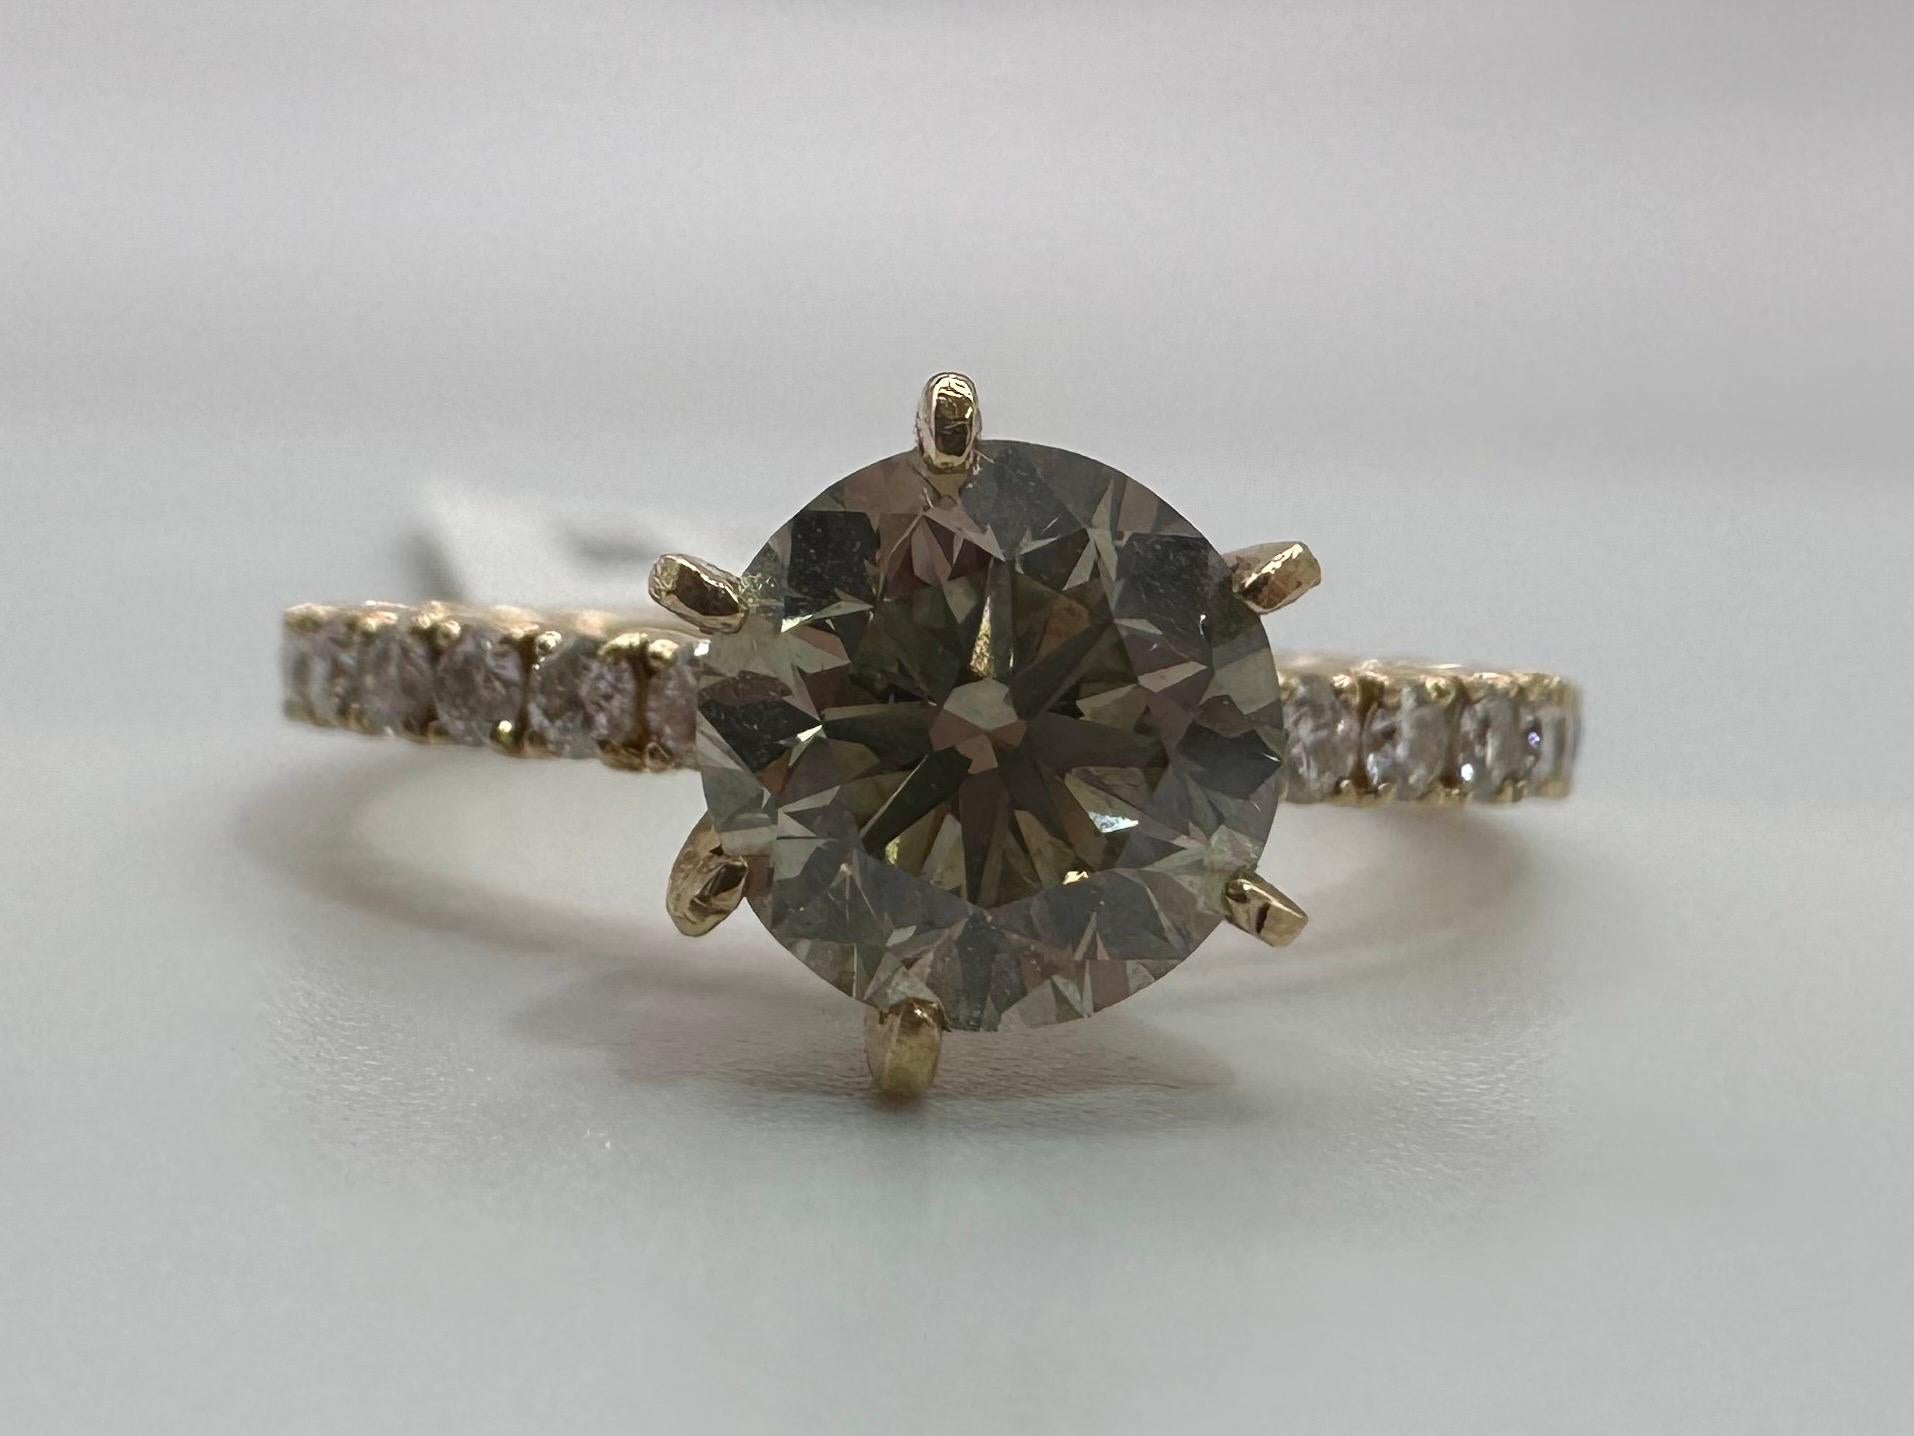 Stunning engagement ring featuring 1.50ct center Si2 clarity and G color, side diamonds are VS-SI and the ring is size 7, can be re-sized.
Handling time for the ring to ship is 10 days.
Certificate of authenticity comes with purchase!

ABOUT US
We